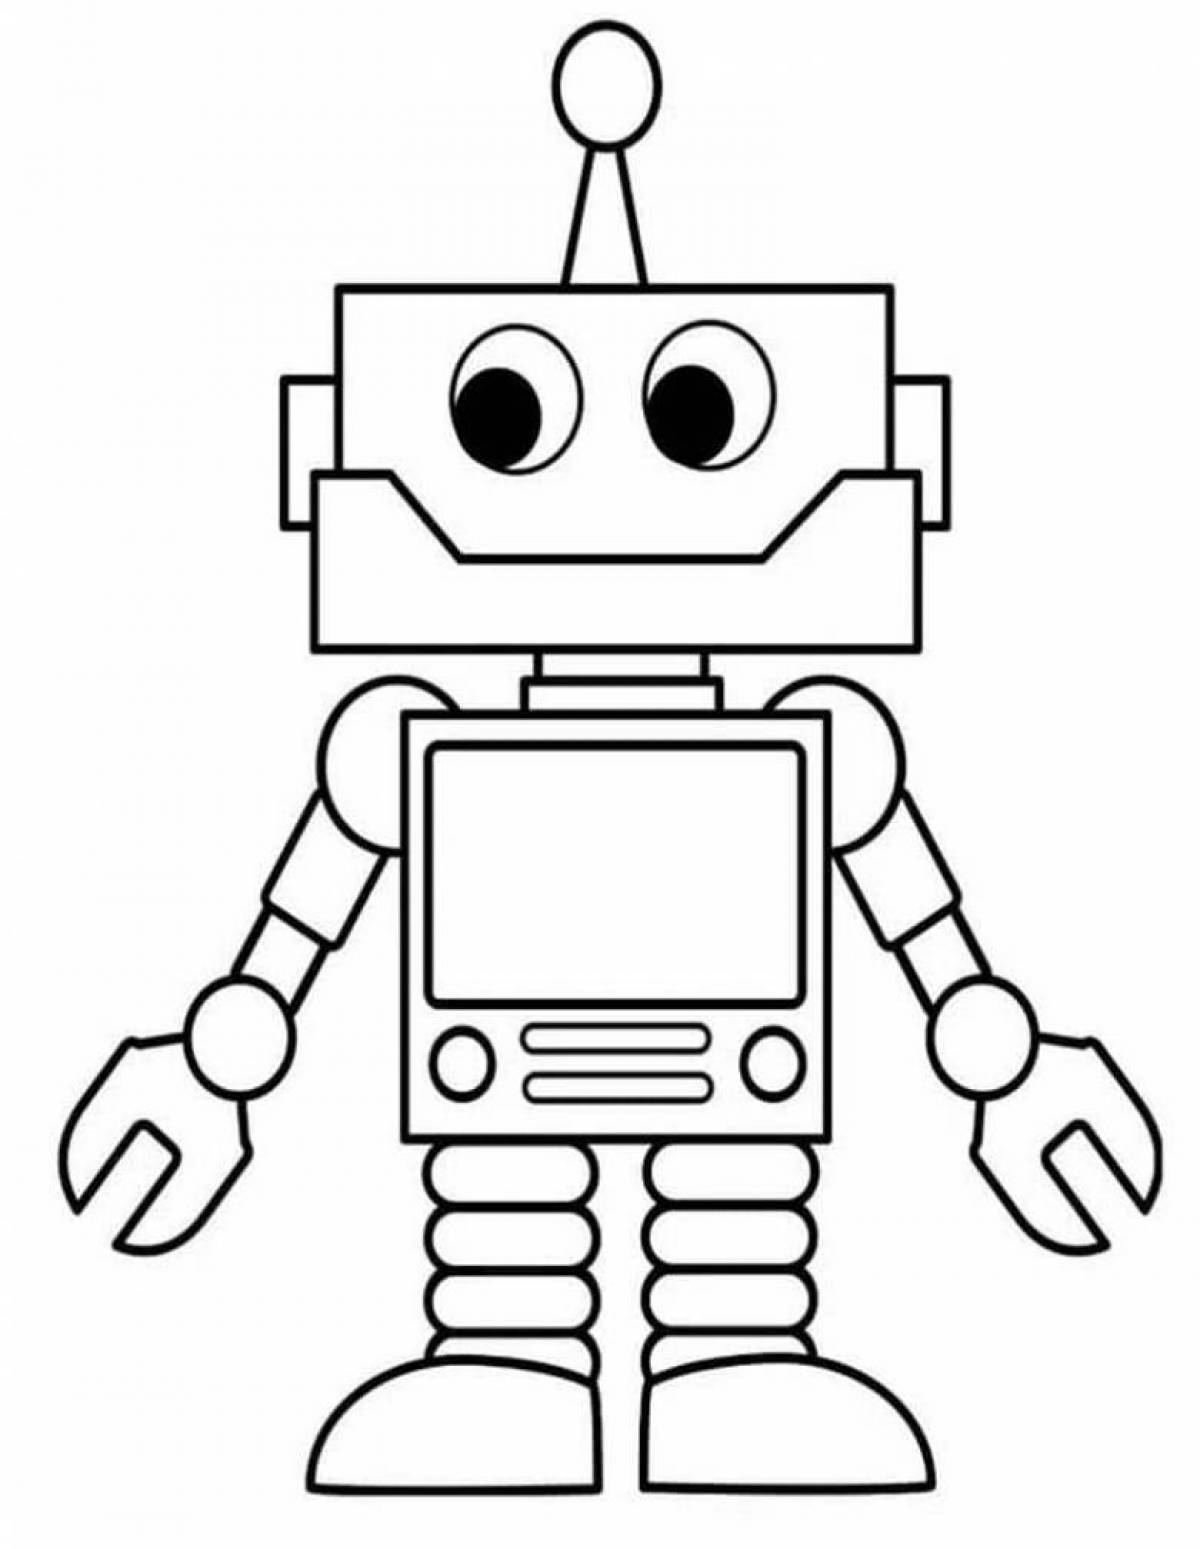 Joyful robot coloring book for 6-7 year olds